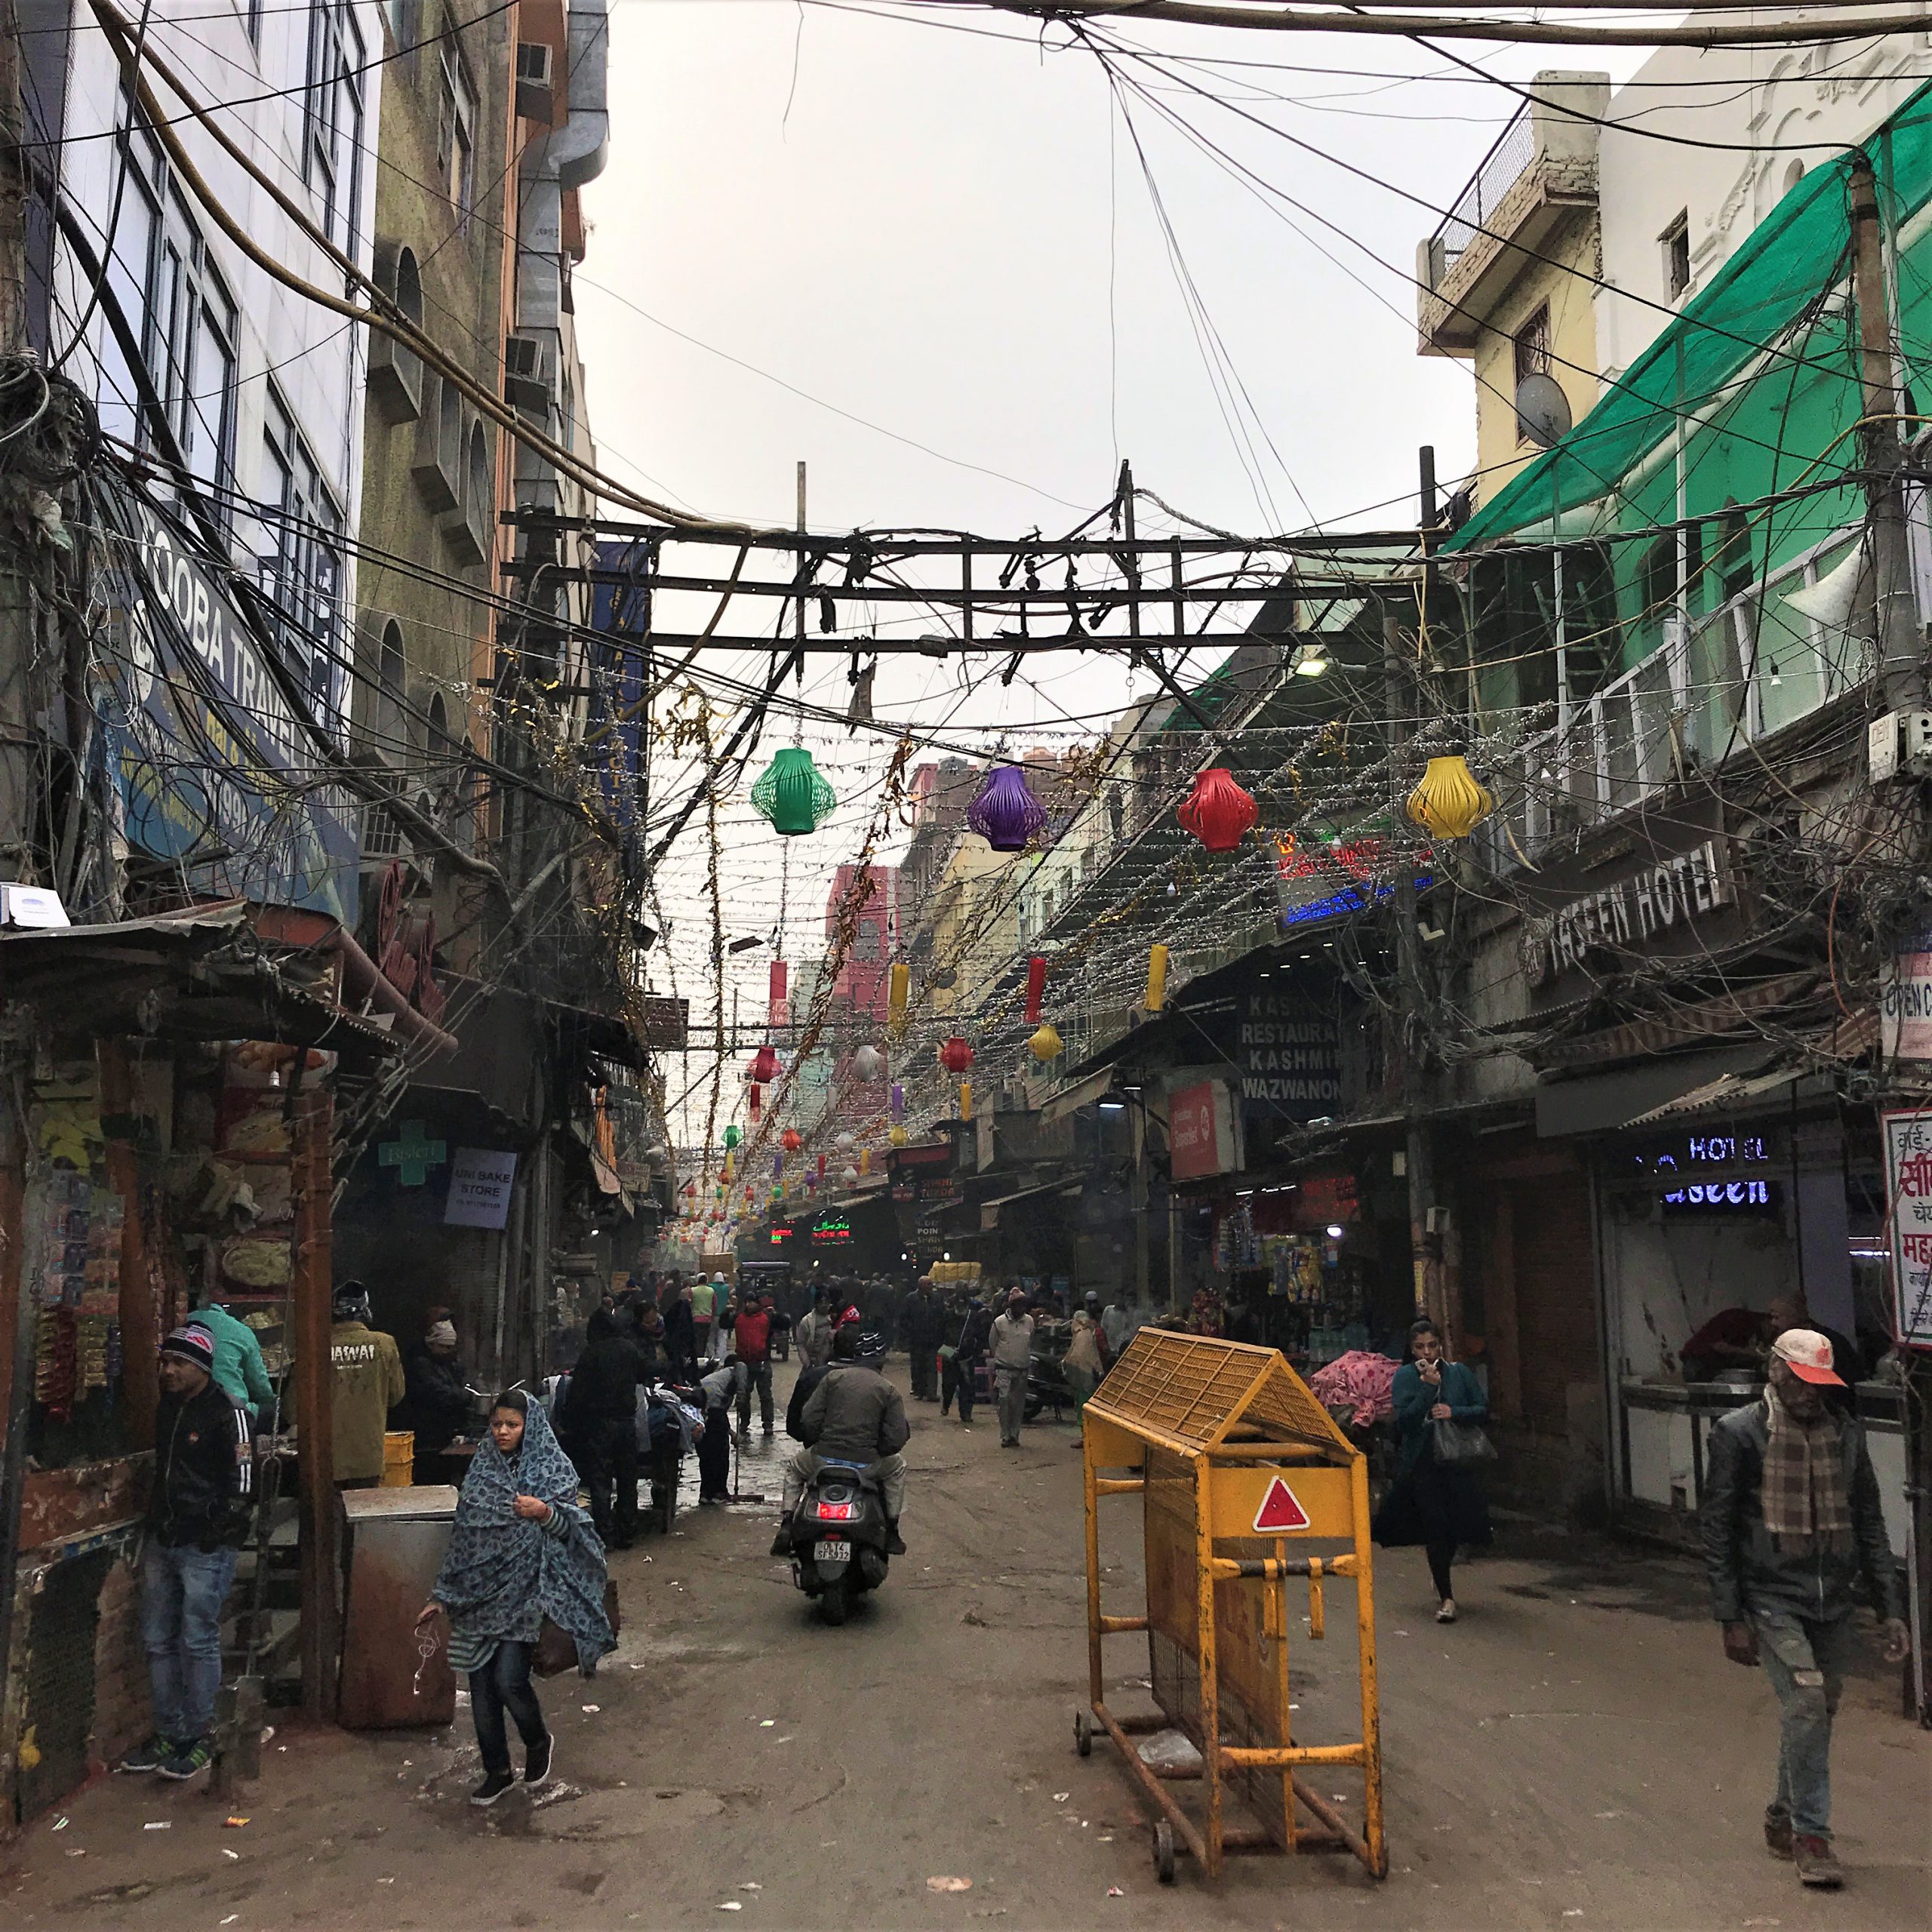 The decorated streets of Delhi, India